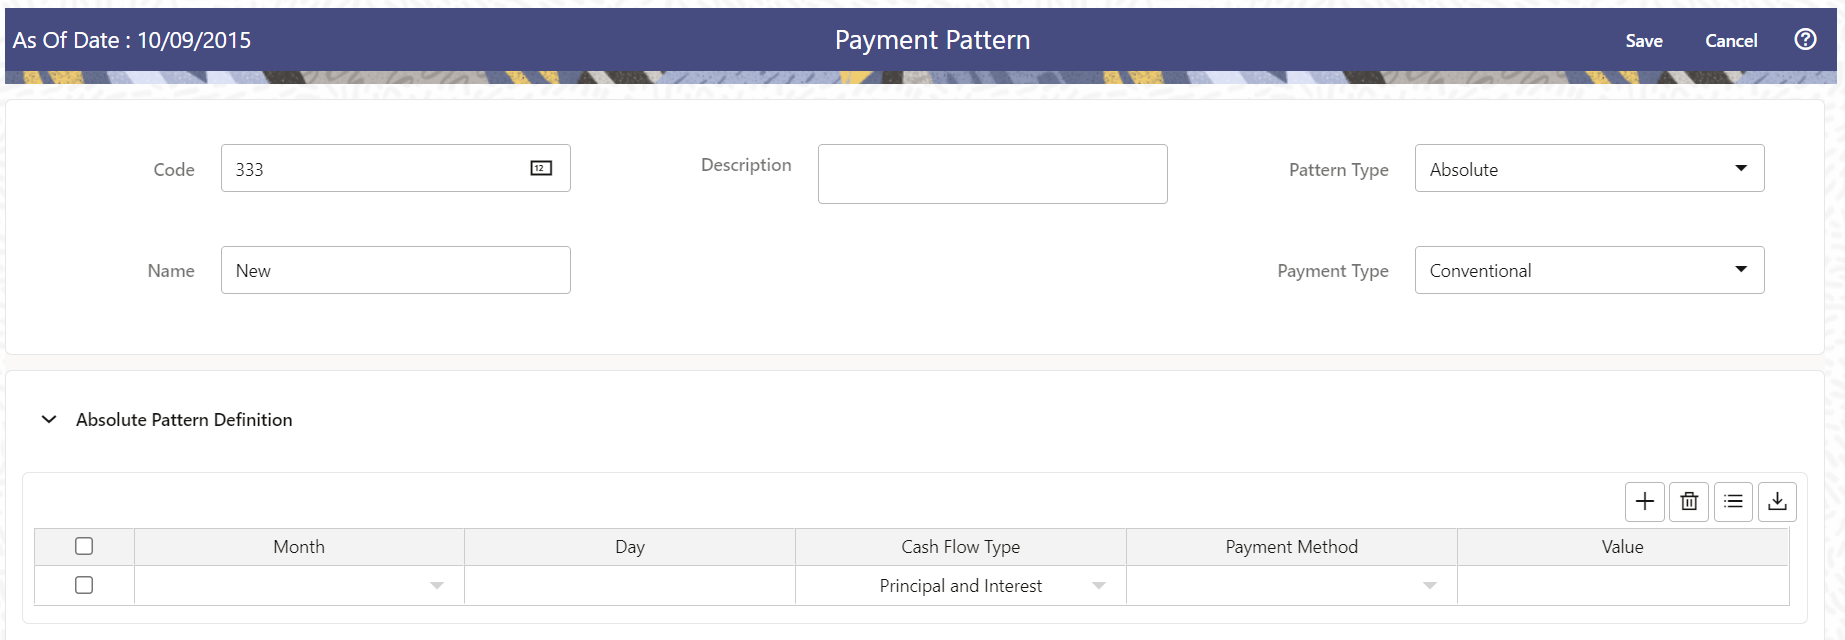 Absolute Payment Patterns